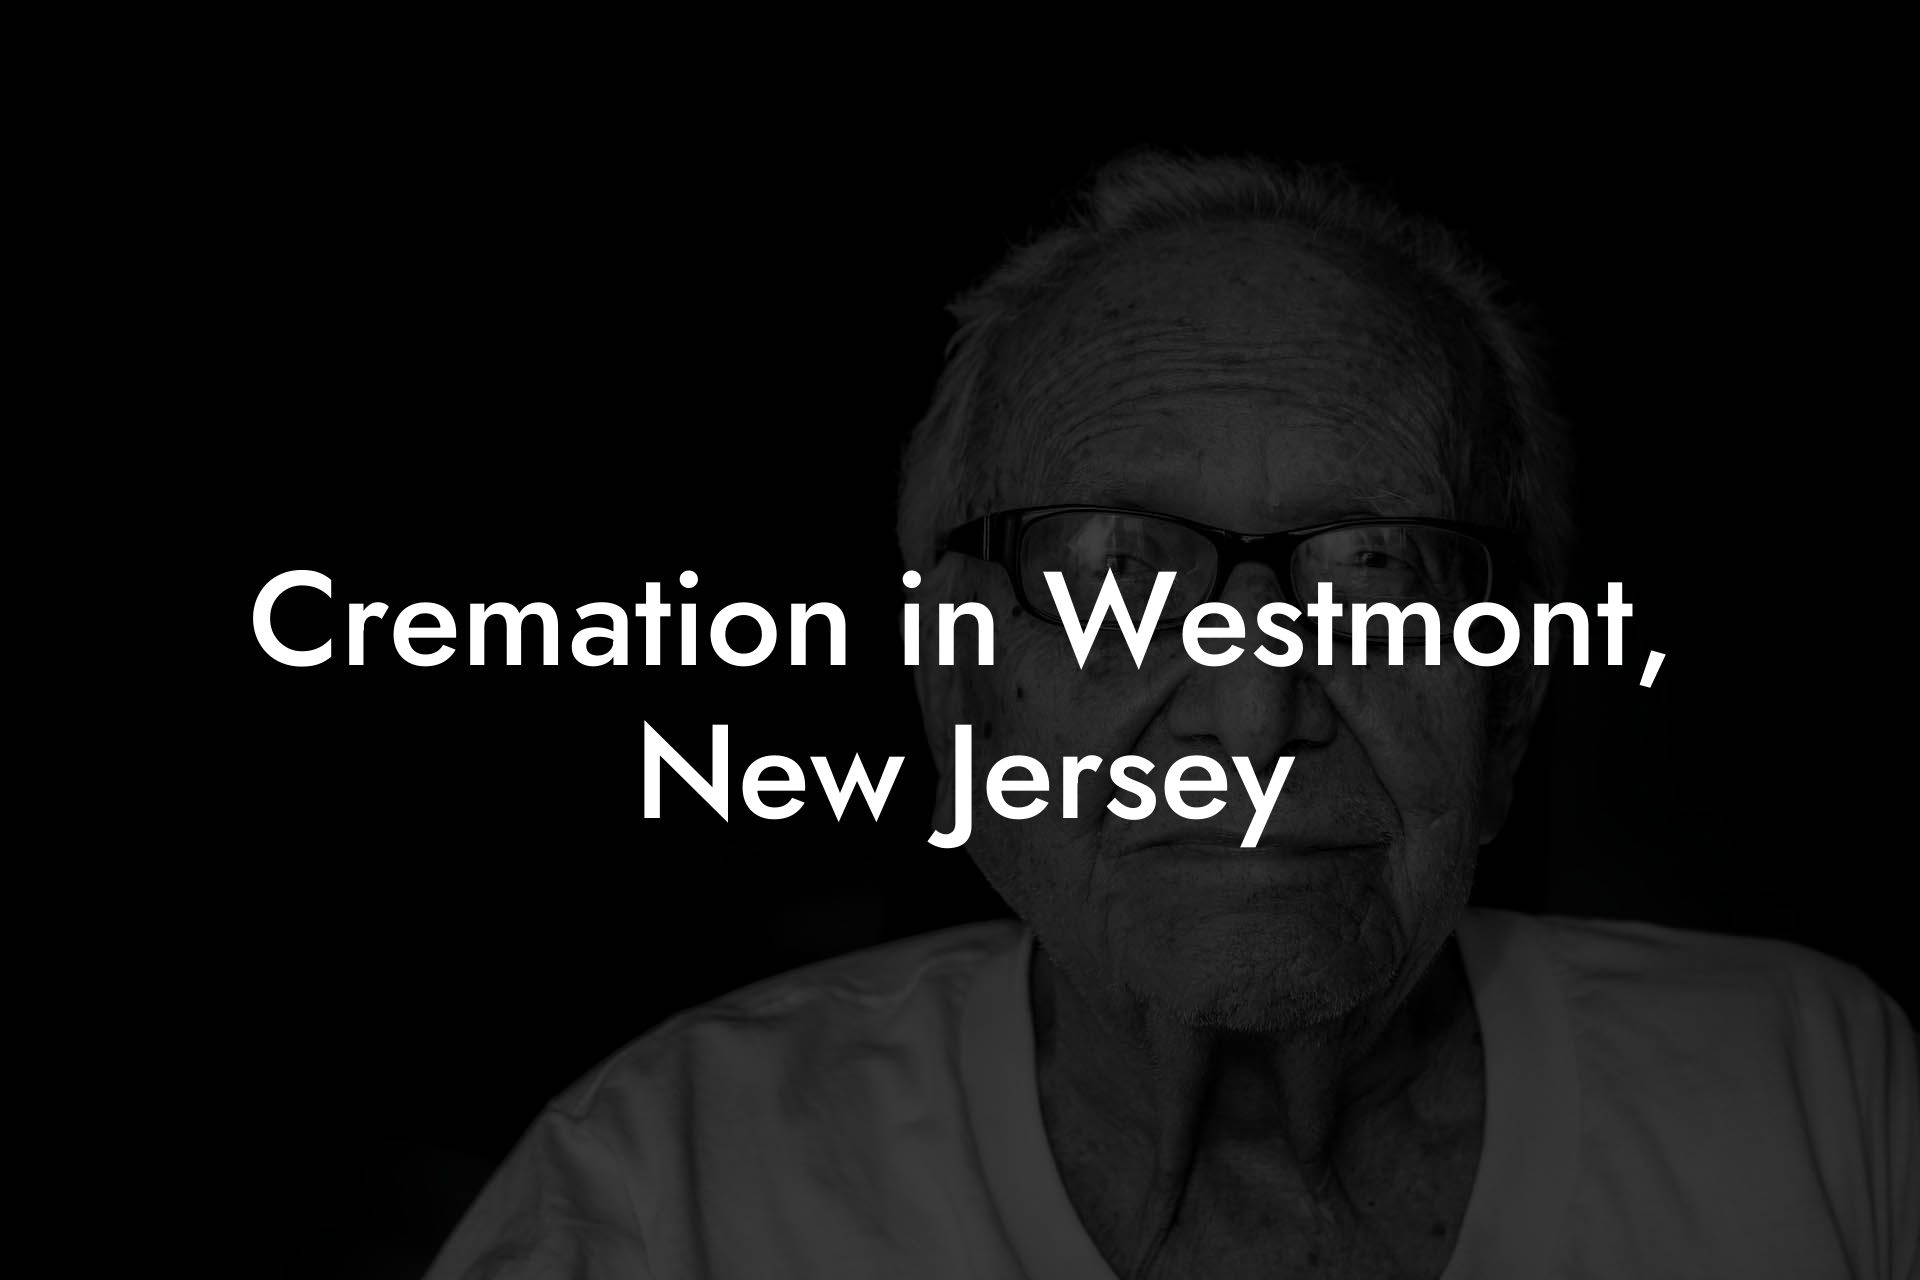 Cremation in Westmont, New Jersey